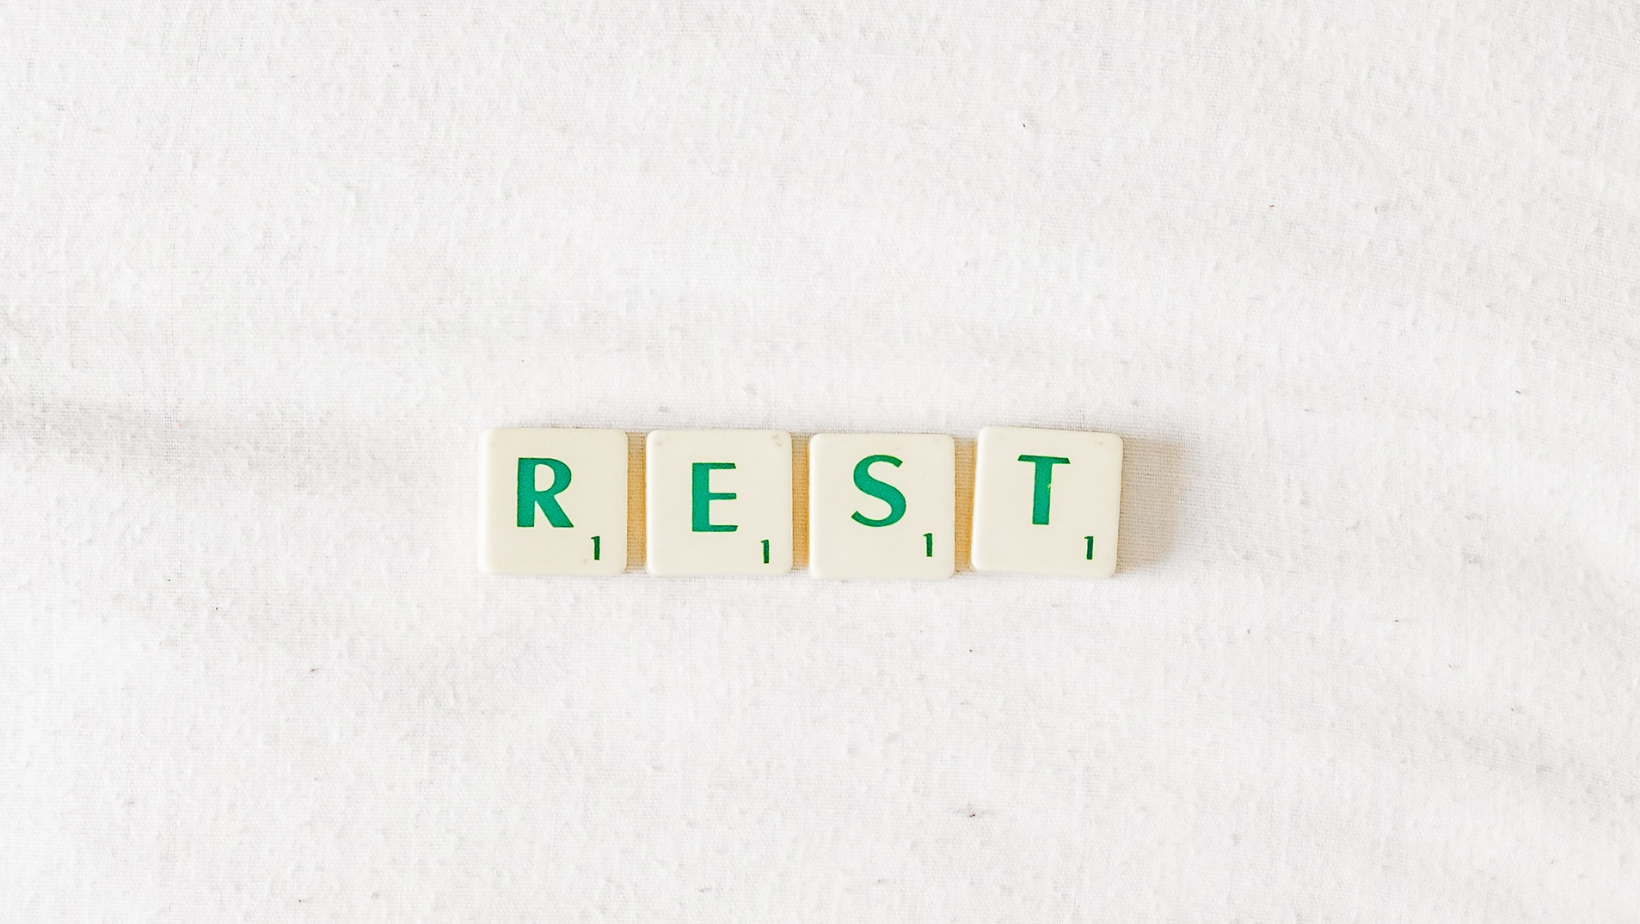 Cream and green scrabble tiles laying on a white background spelling 'rest'